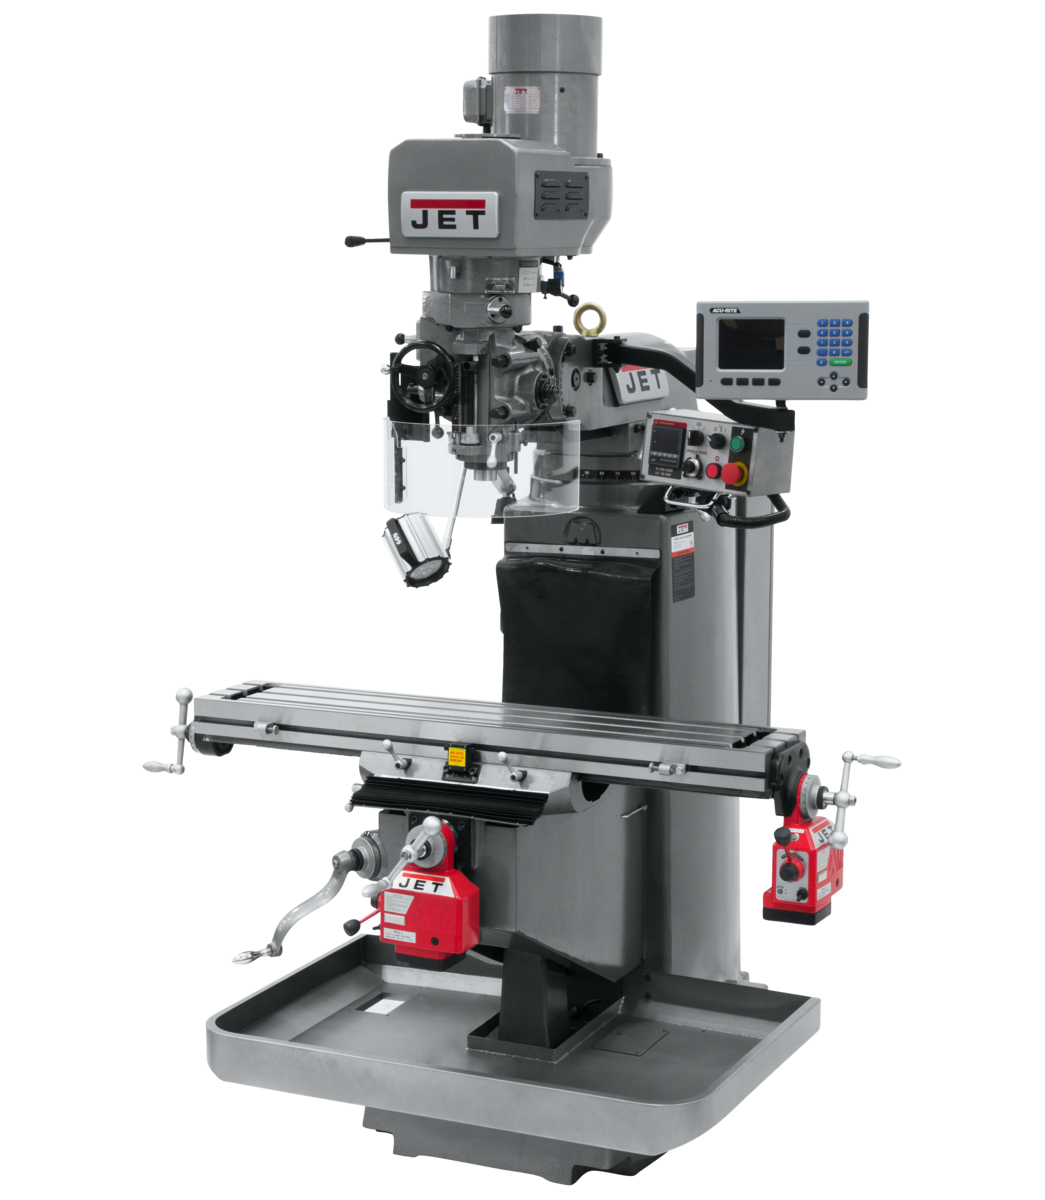 JTM-949EVS Mill With 3-Axis Acu-Rite 203 DRO (Quill) With X and Y-Axis Powerfeeds